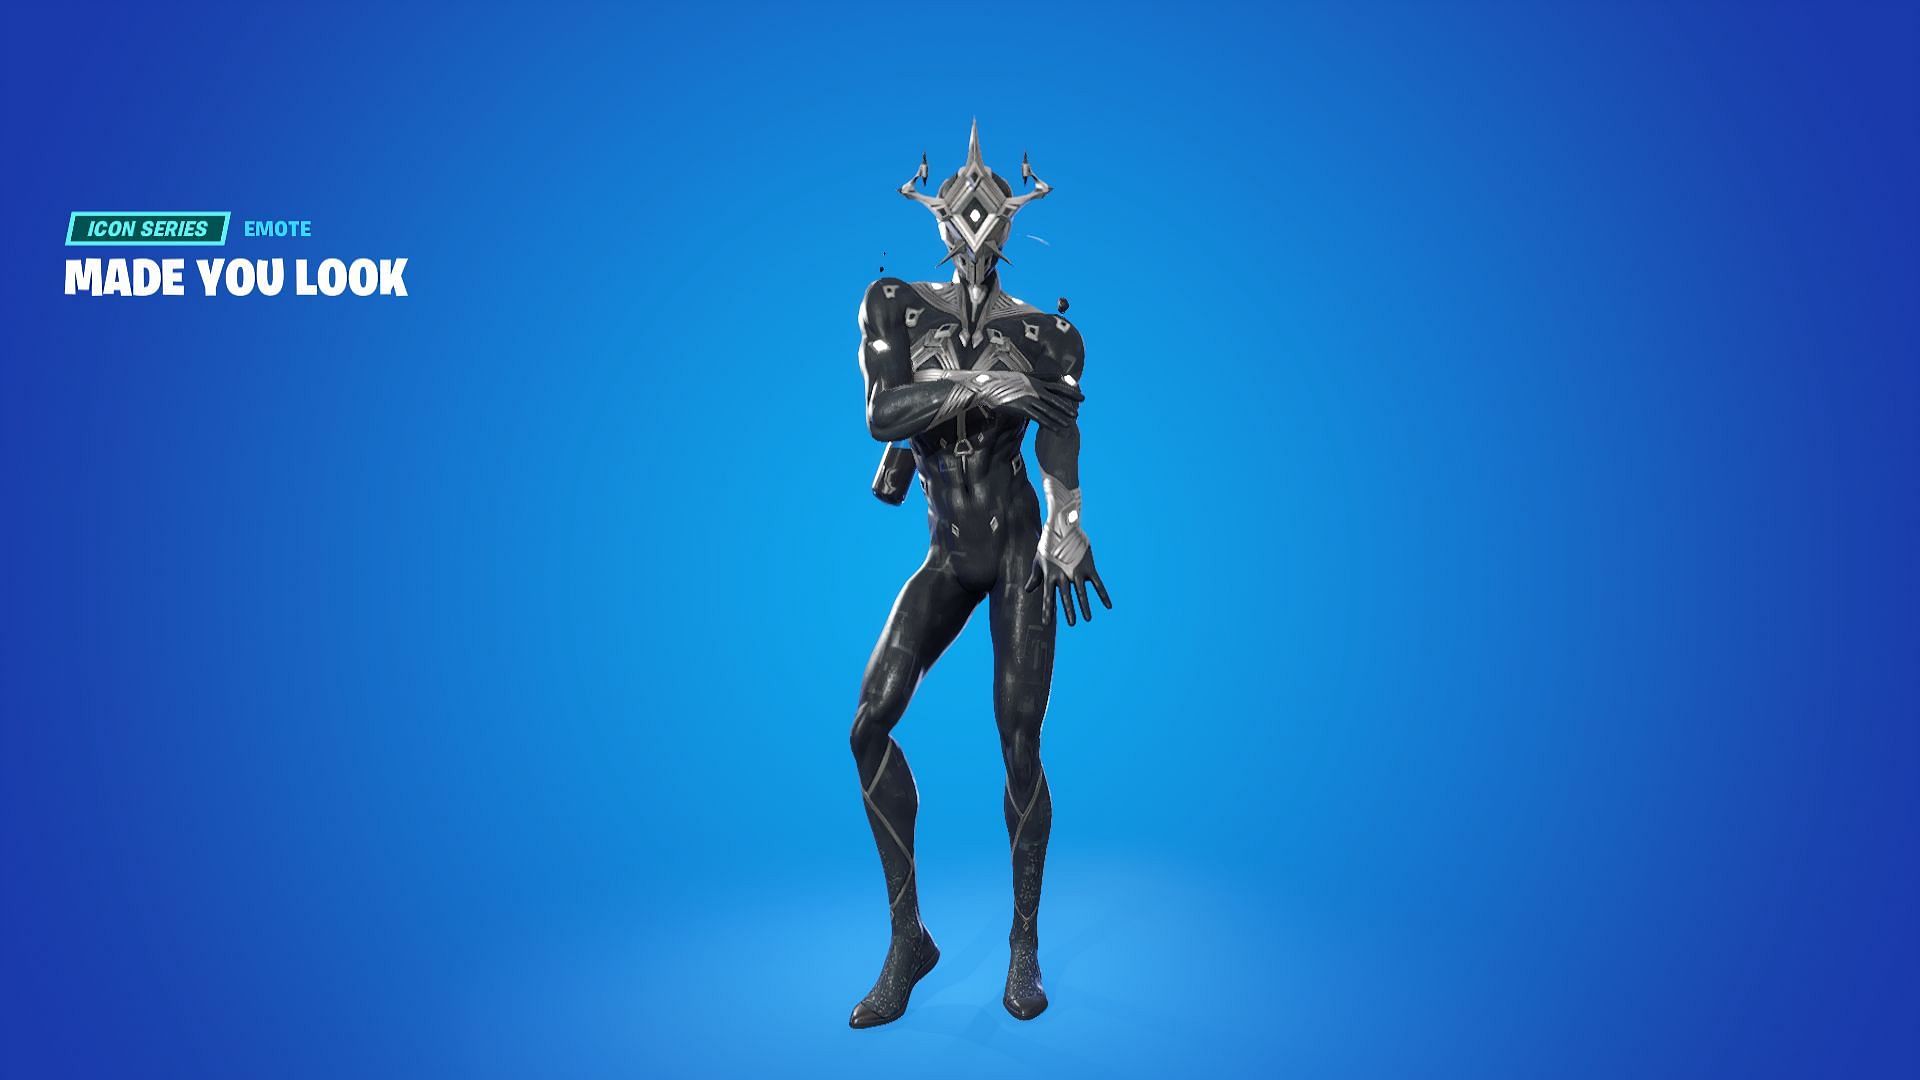 Made You Look Emote can be purchased from the Item Shop(Image via Epic Games/Fortnite)